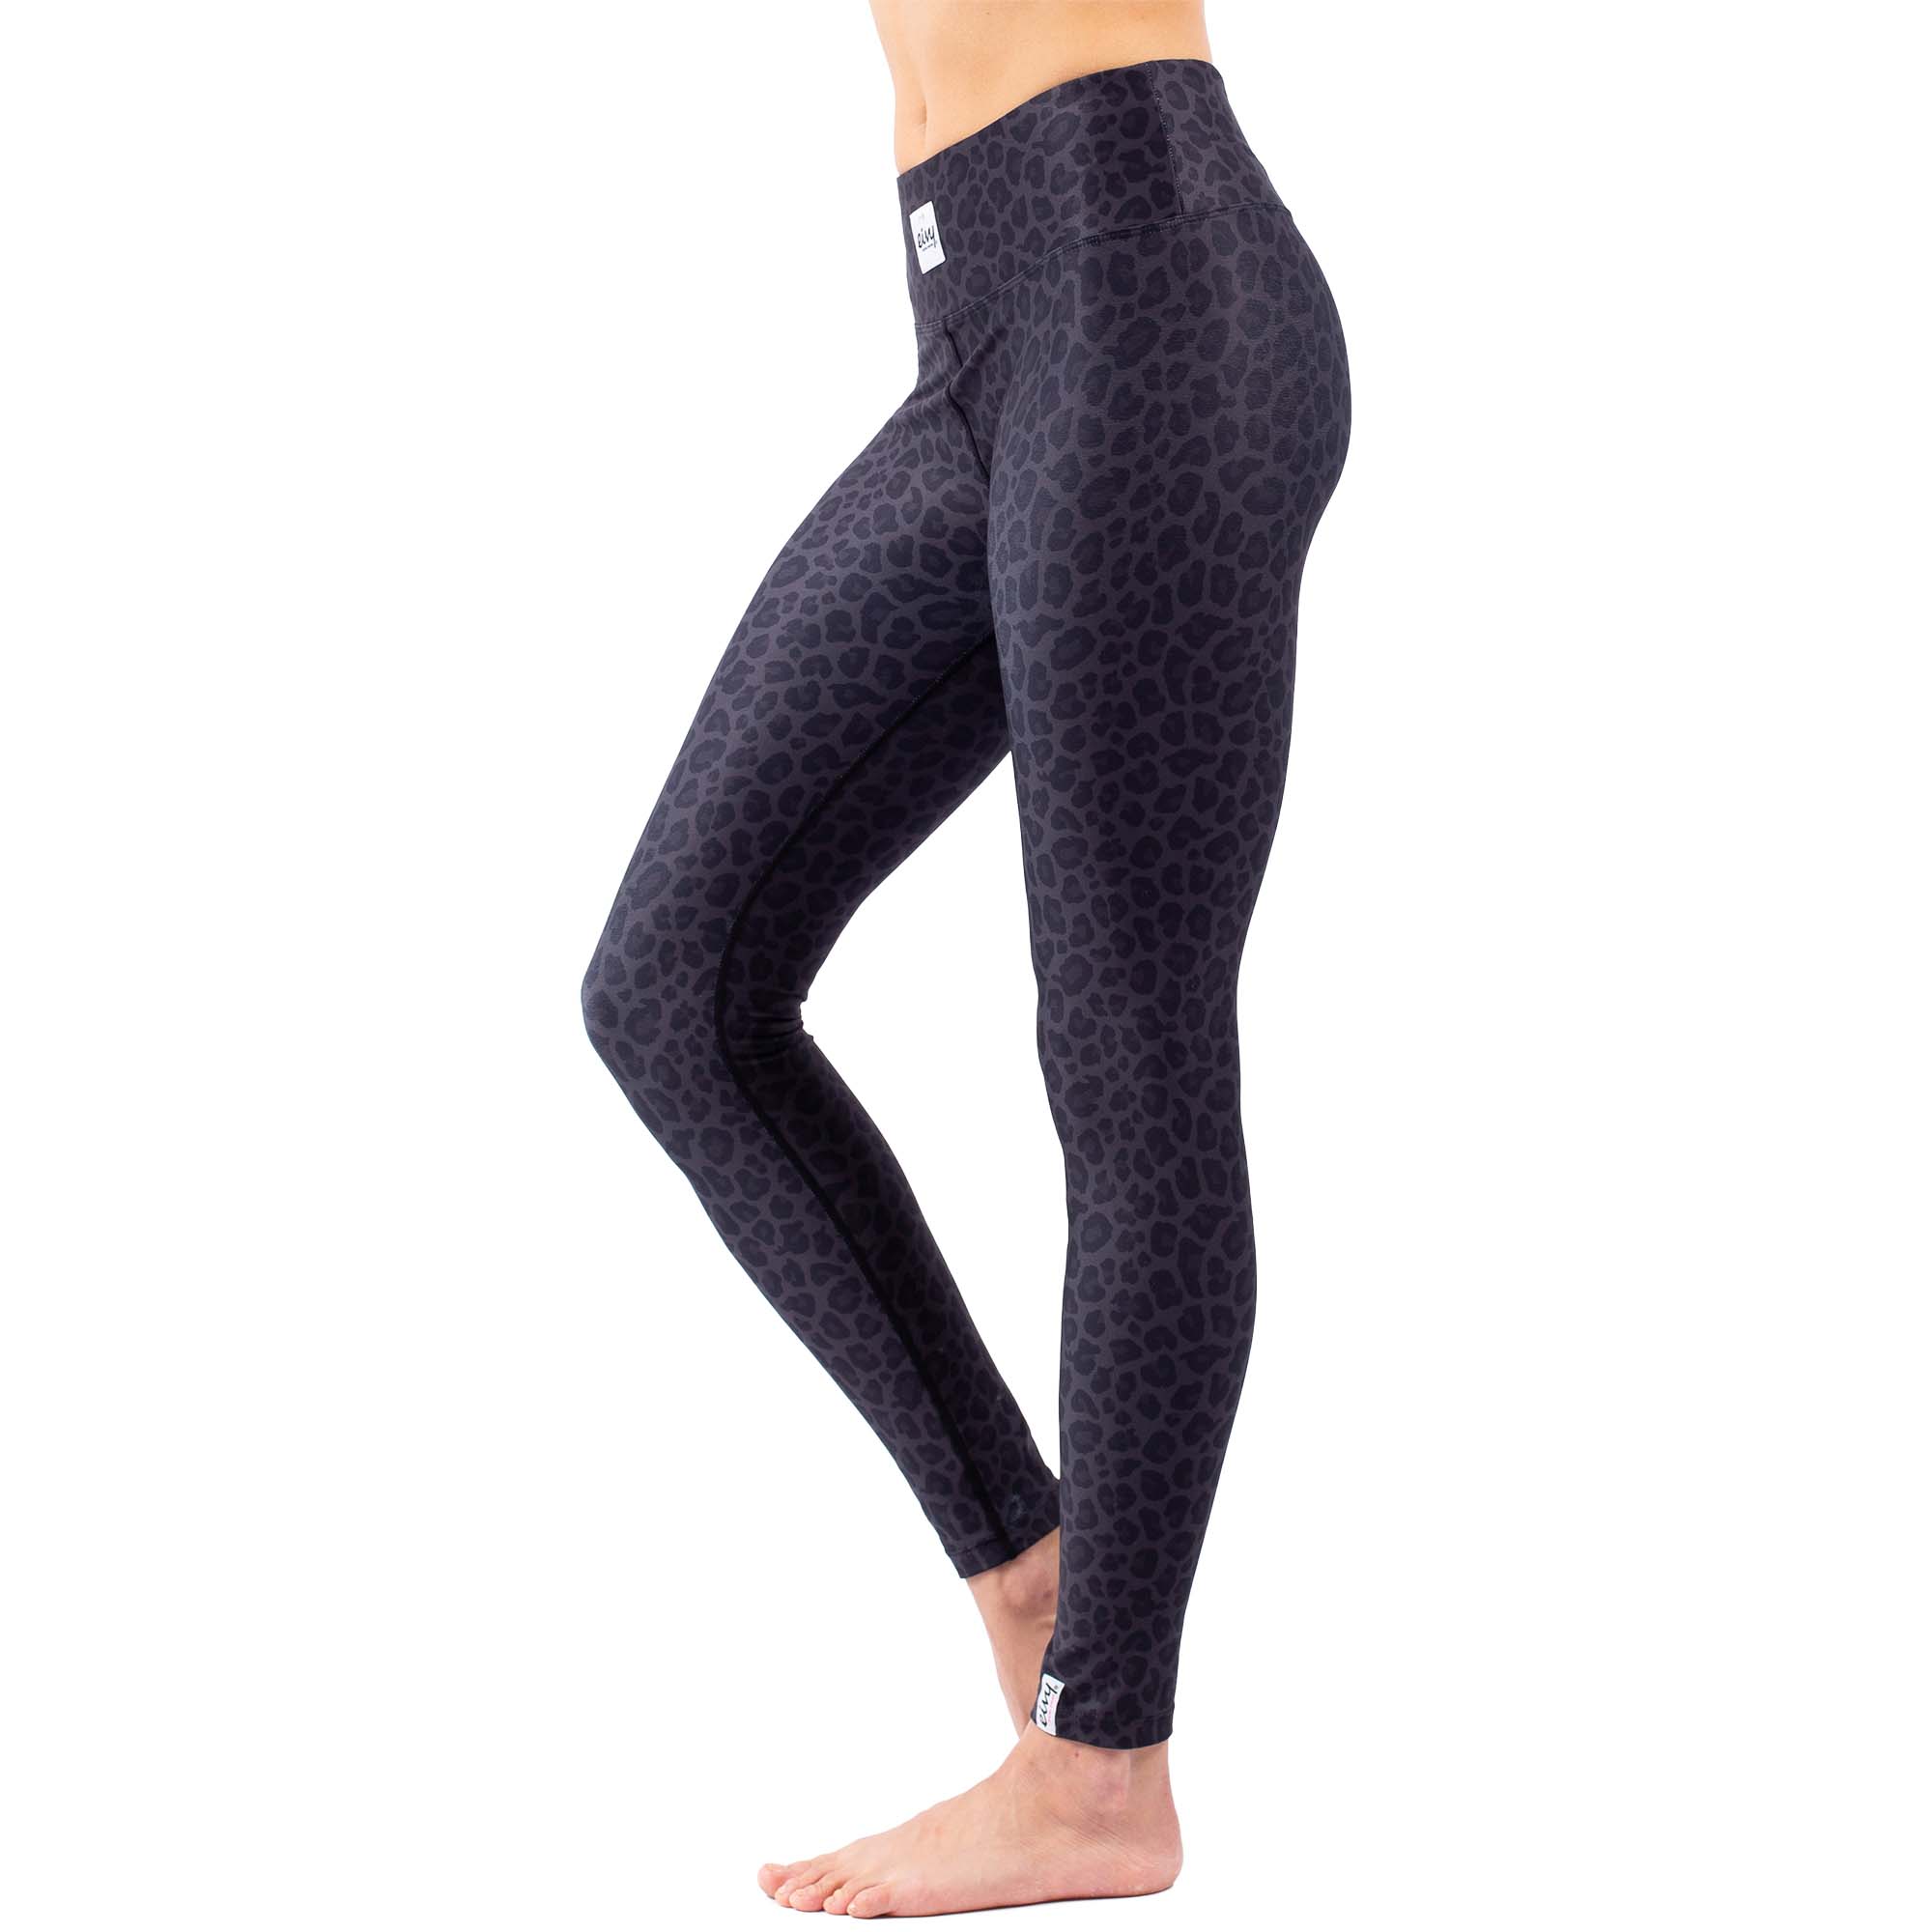 Eivy Icecold Tights Women's Baselayer Leggings